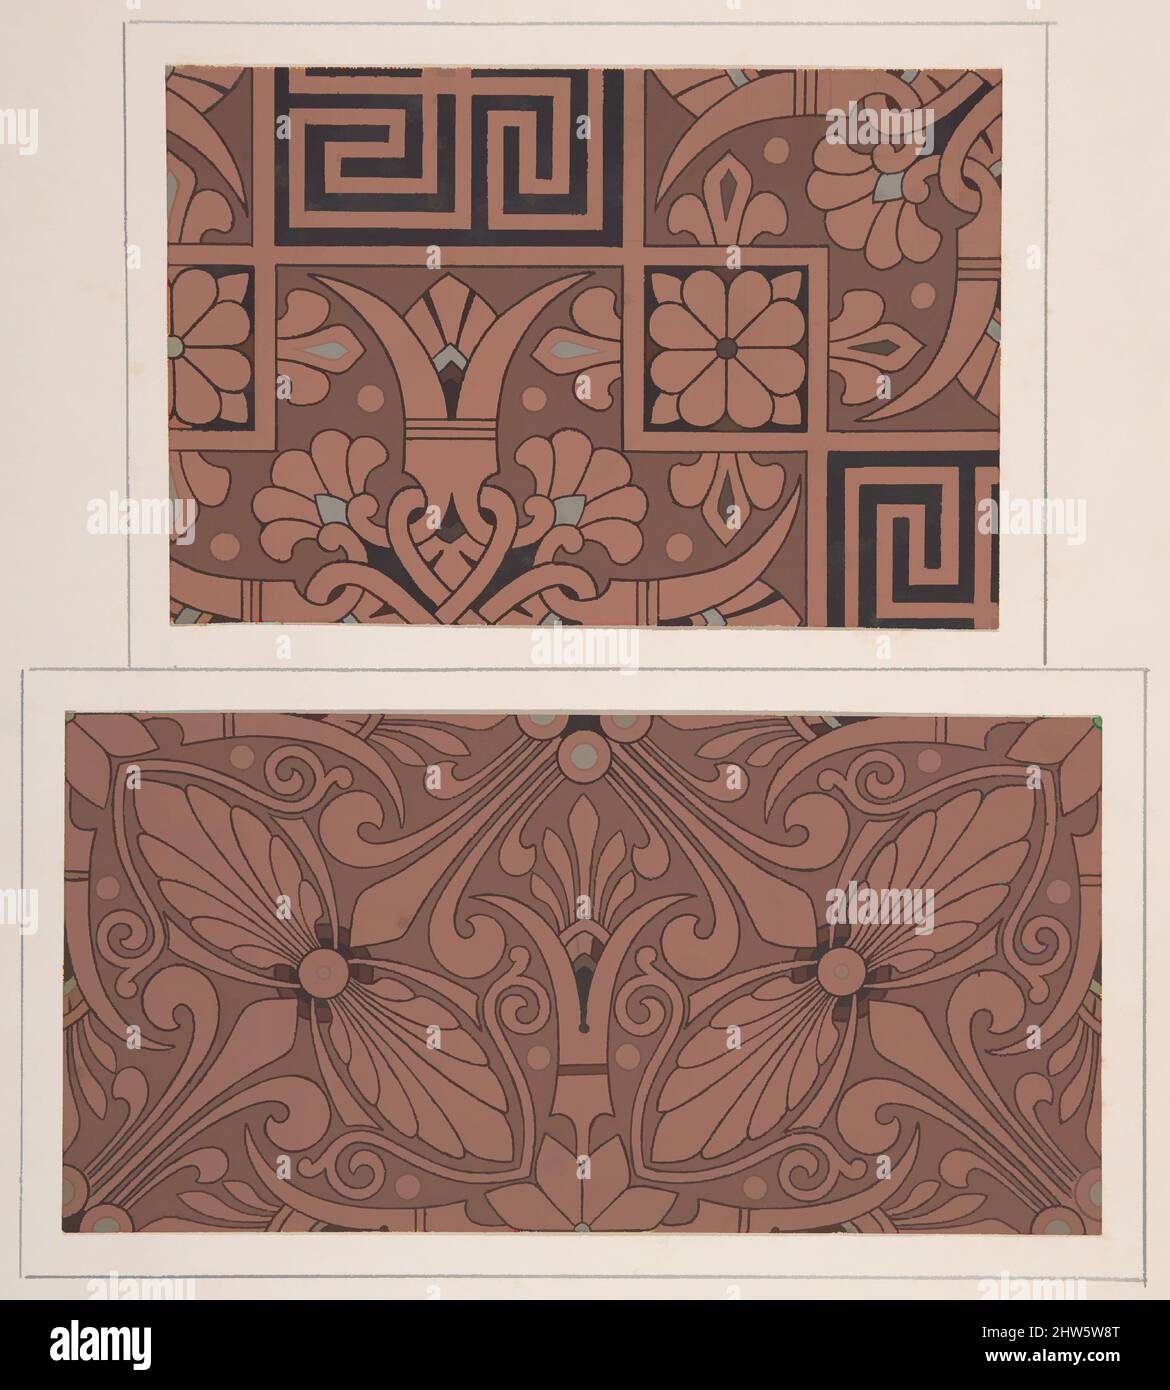 Art inspired by Design drawing, ca. 1883, based on earlier design, Graphite, ink, and gouache, sheet: 15 15/16 x 11 in. (40.5 x 27.9 cm), Christopher Dresser (British, Glasgow, Scotland 1834–1904 Mulhouse, Classic works modernized by Artotop with a splash of modernity. Shapes, color and value, eye-catching visual impact on art. Emotions through freedom of artworks in a contemporary way. A timeless message pursuing a wildly creative new direction. Artists turning to the digital medium and creating the Artotop NFT Stock Photo